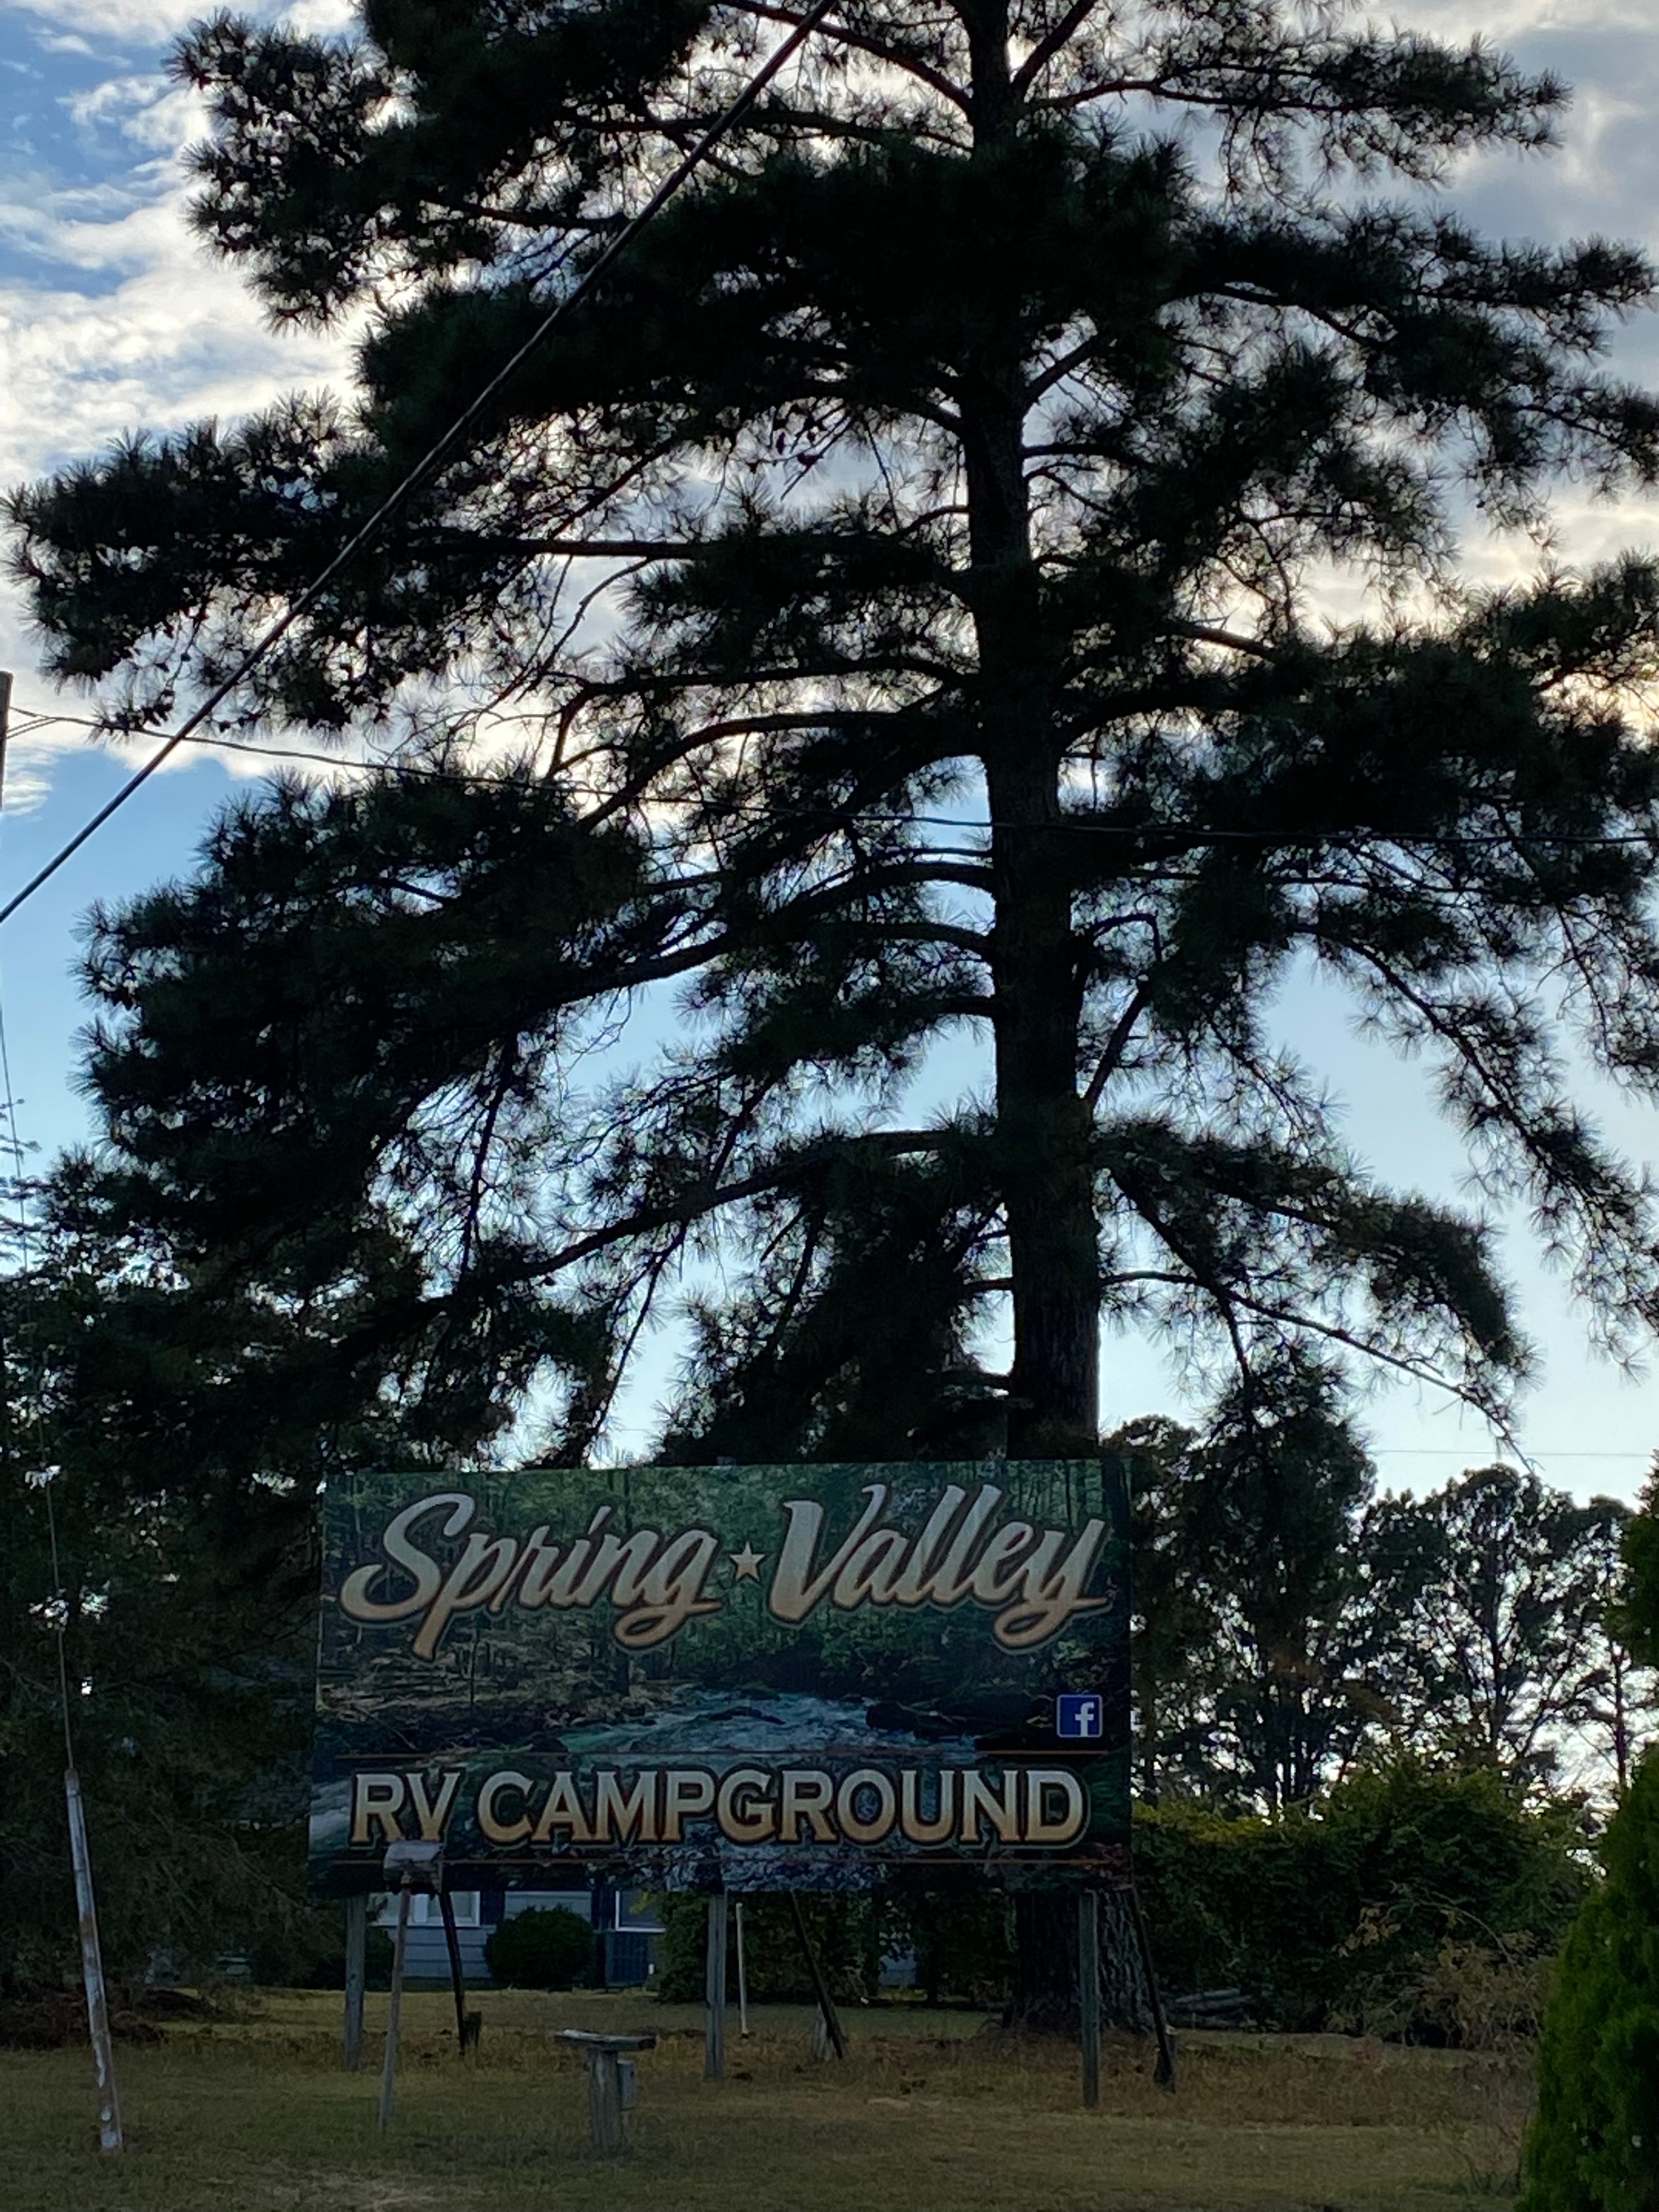 Camper submitted image from Spring Valley RV Campground - 1